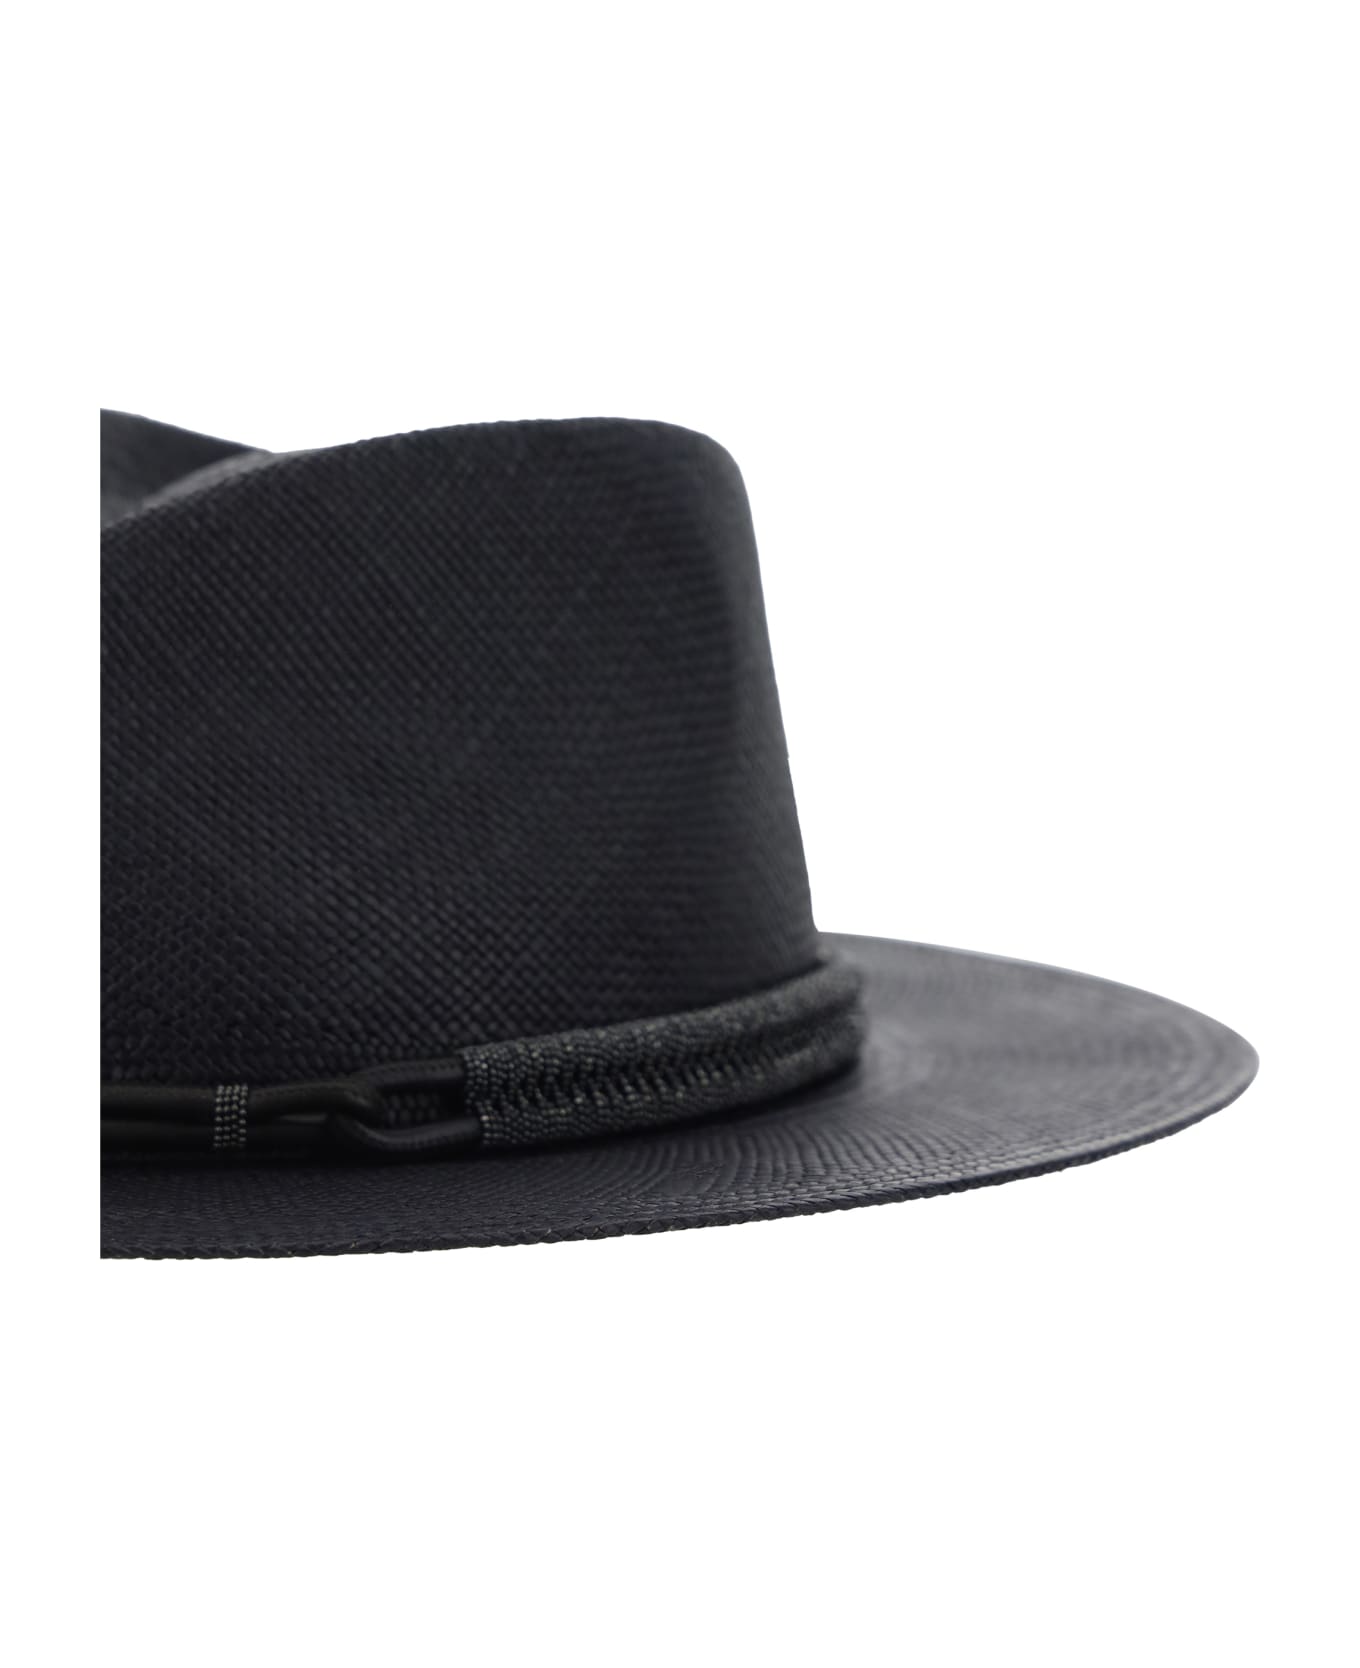 Brunello Cucinelli Straw Fedora With Leather Band And Necklace - Black